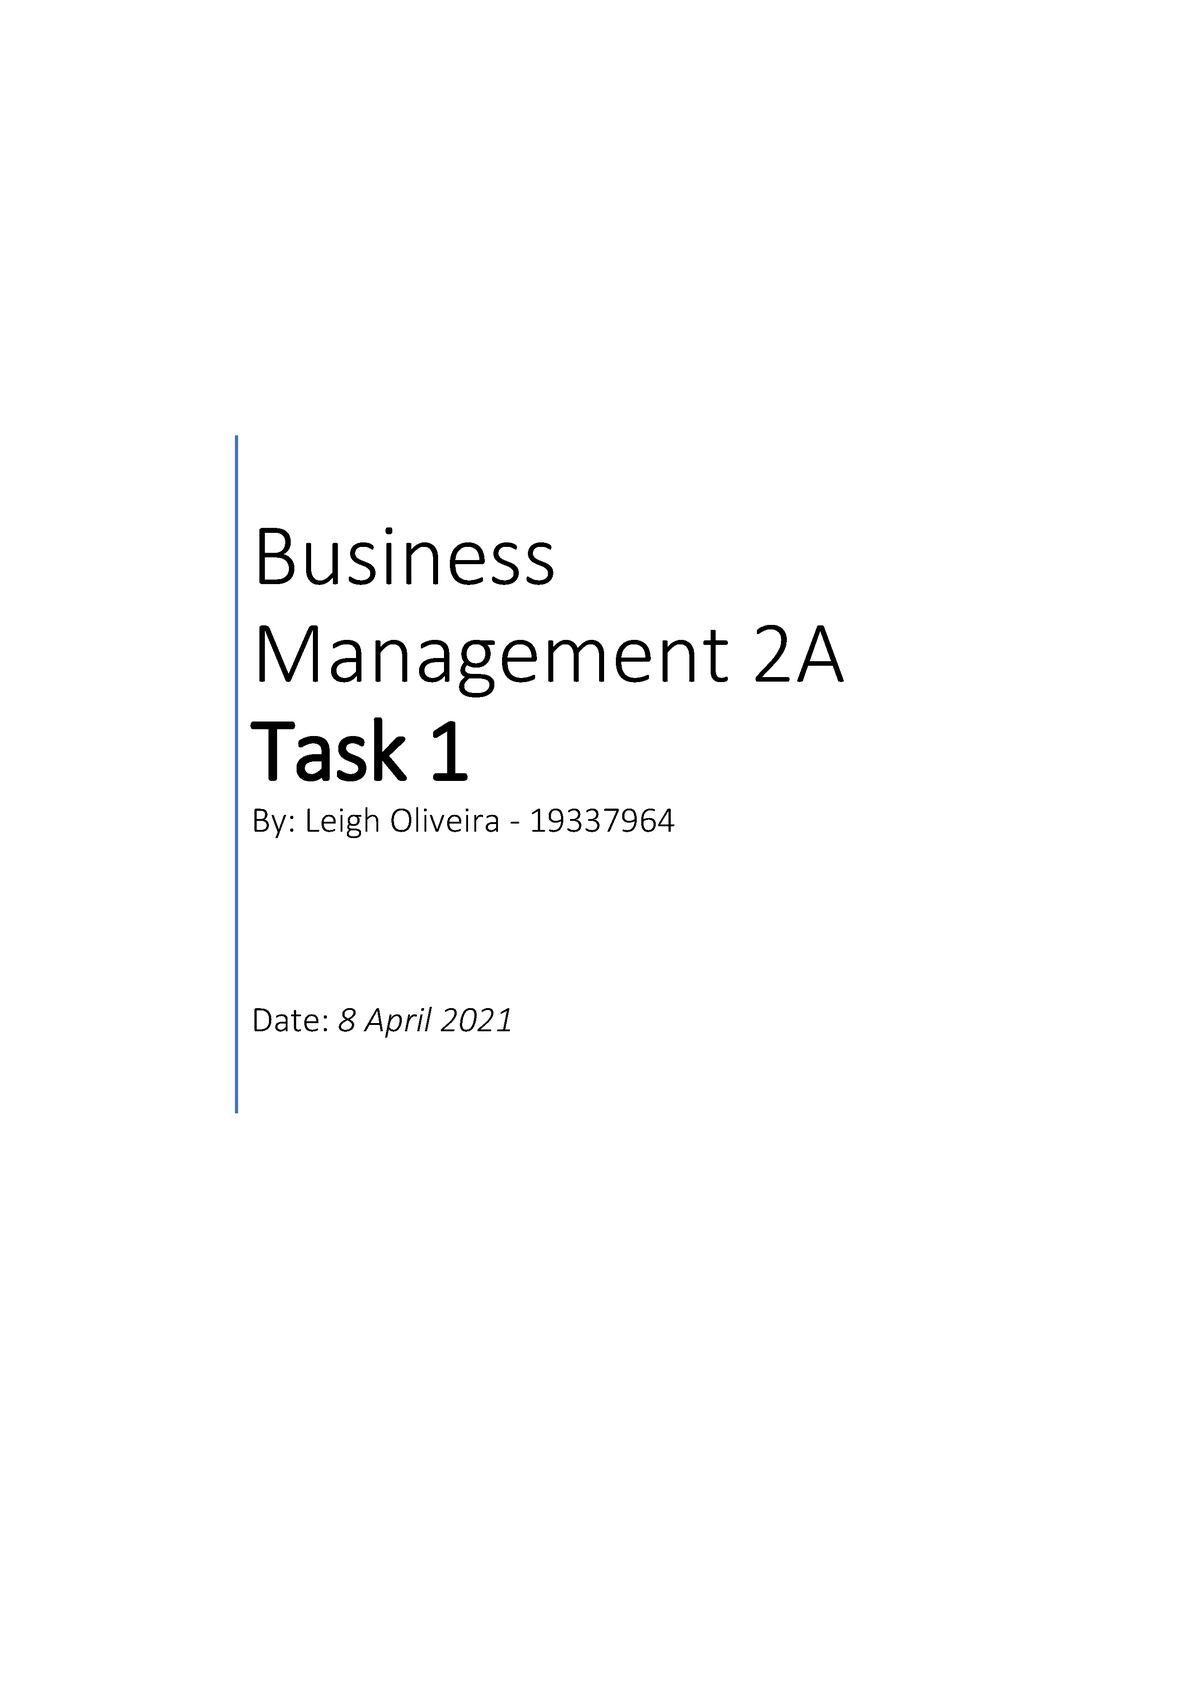 business management 2a assignment questions and answers